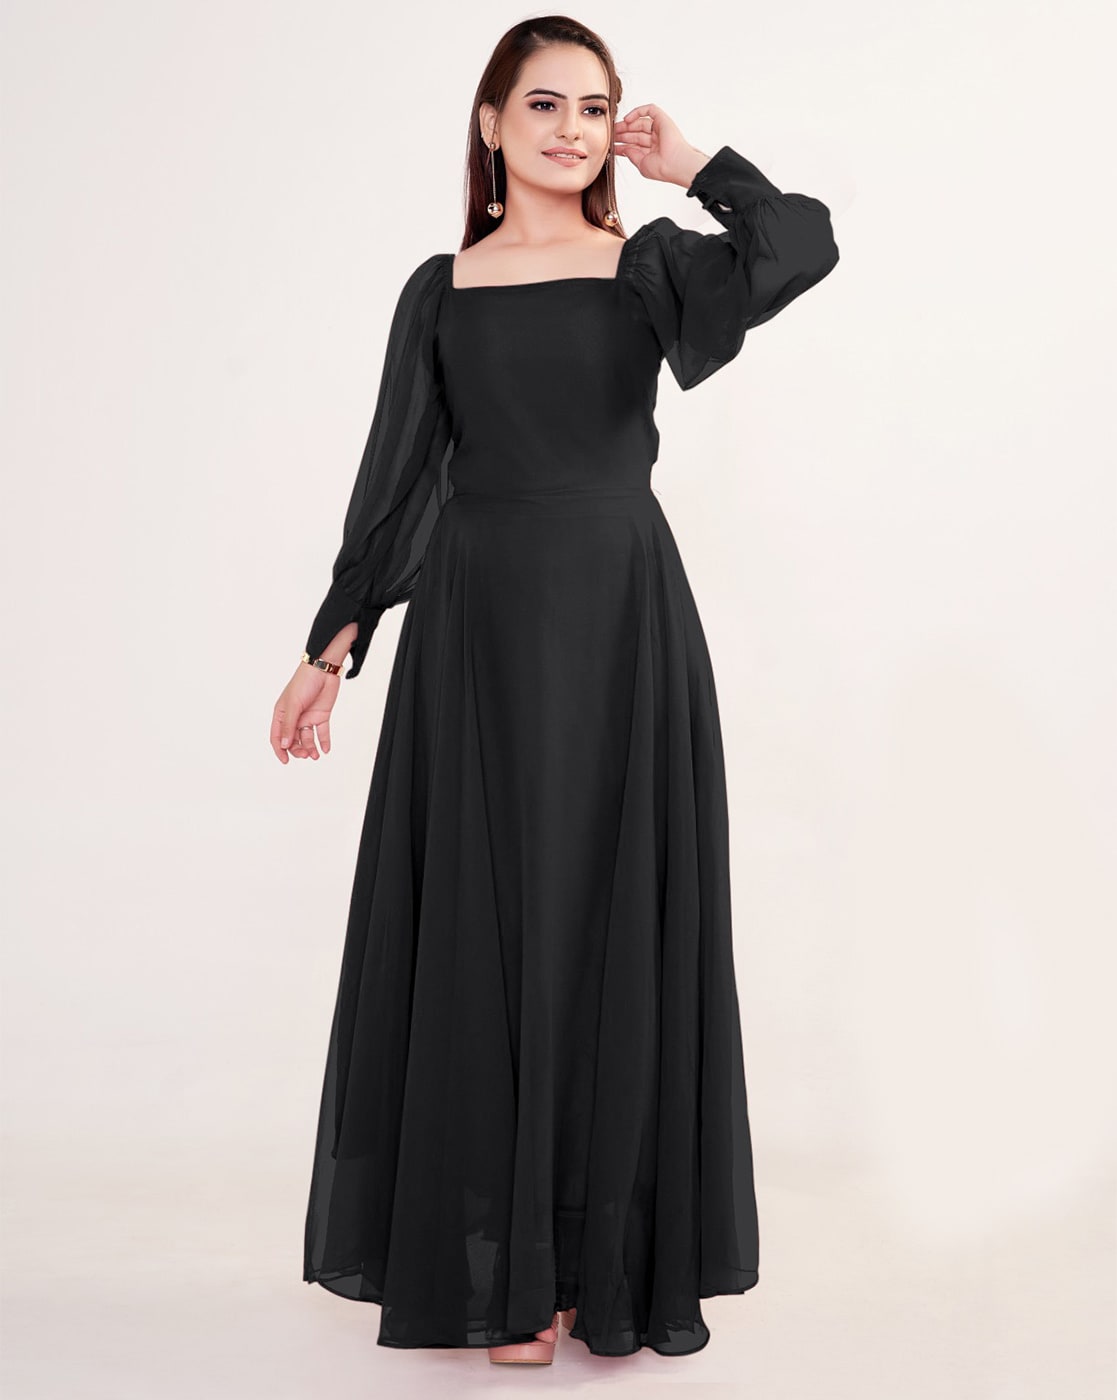 French Novelty: Jovani 23847 Off Shoulder Puff Sleeve Gown